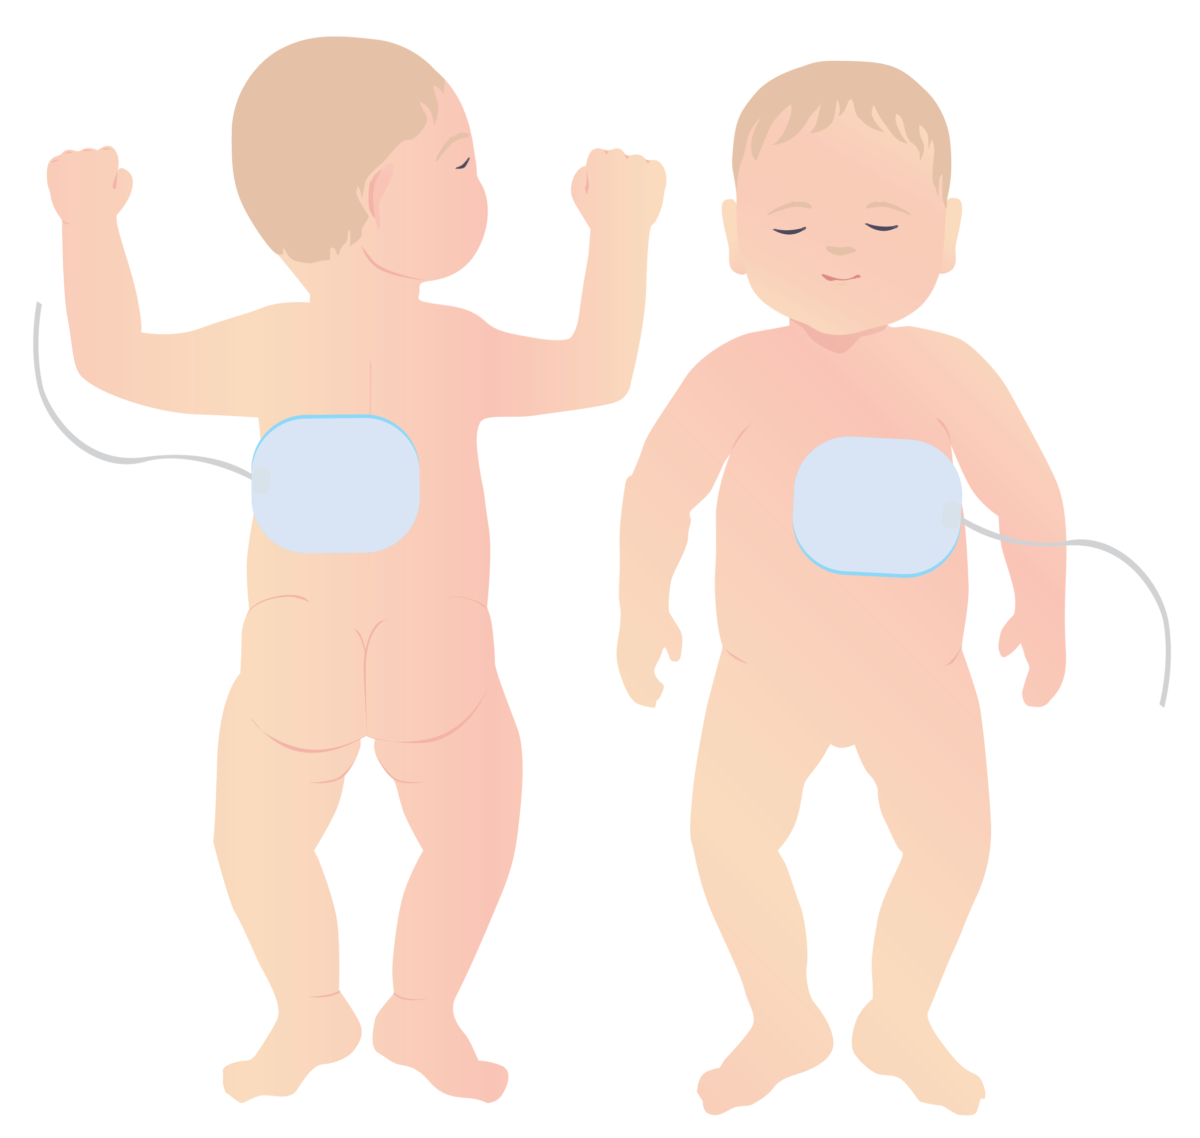 Defibrillator pad placement for infants-01